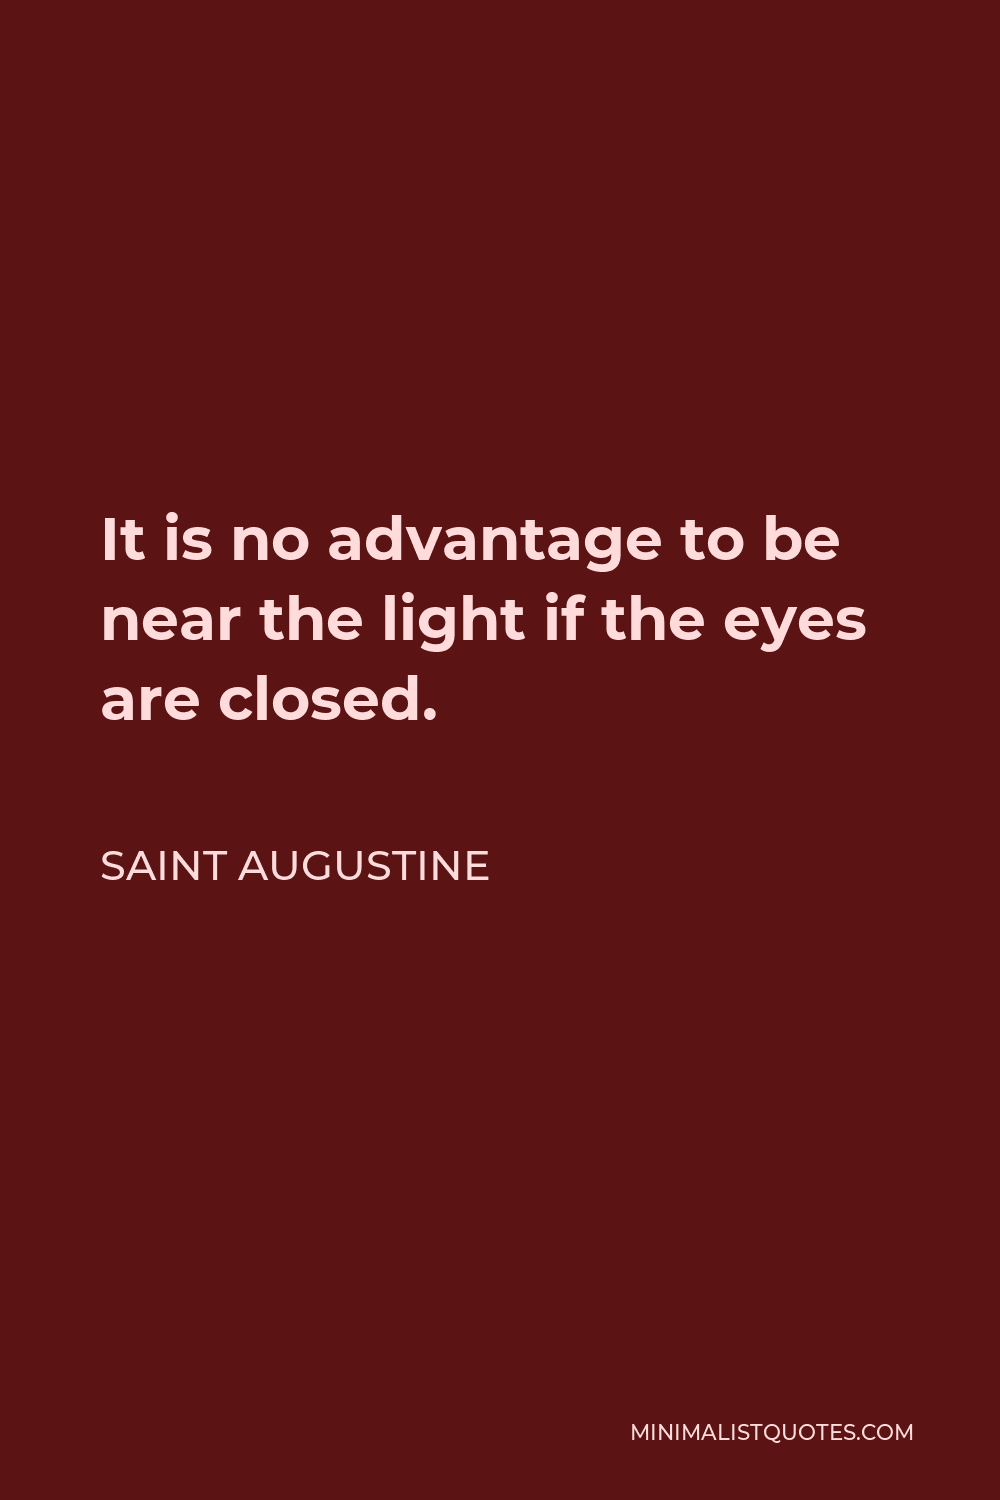 Saint Augustine Quote - It is no advantage to be near the light if the eyes are closed.